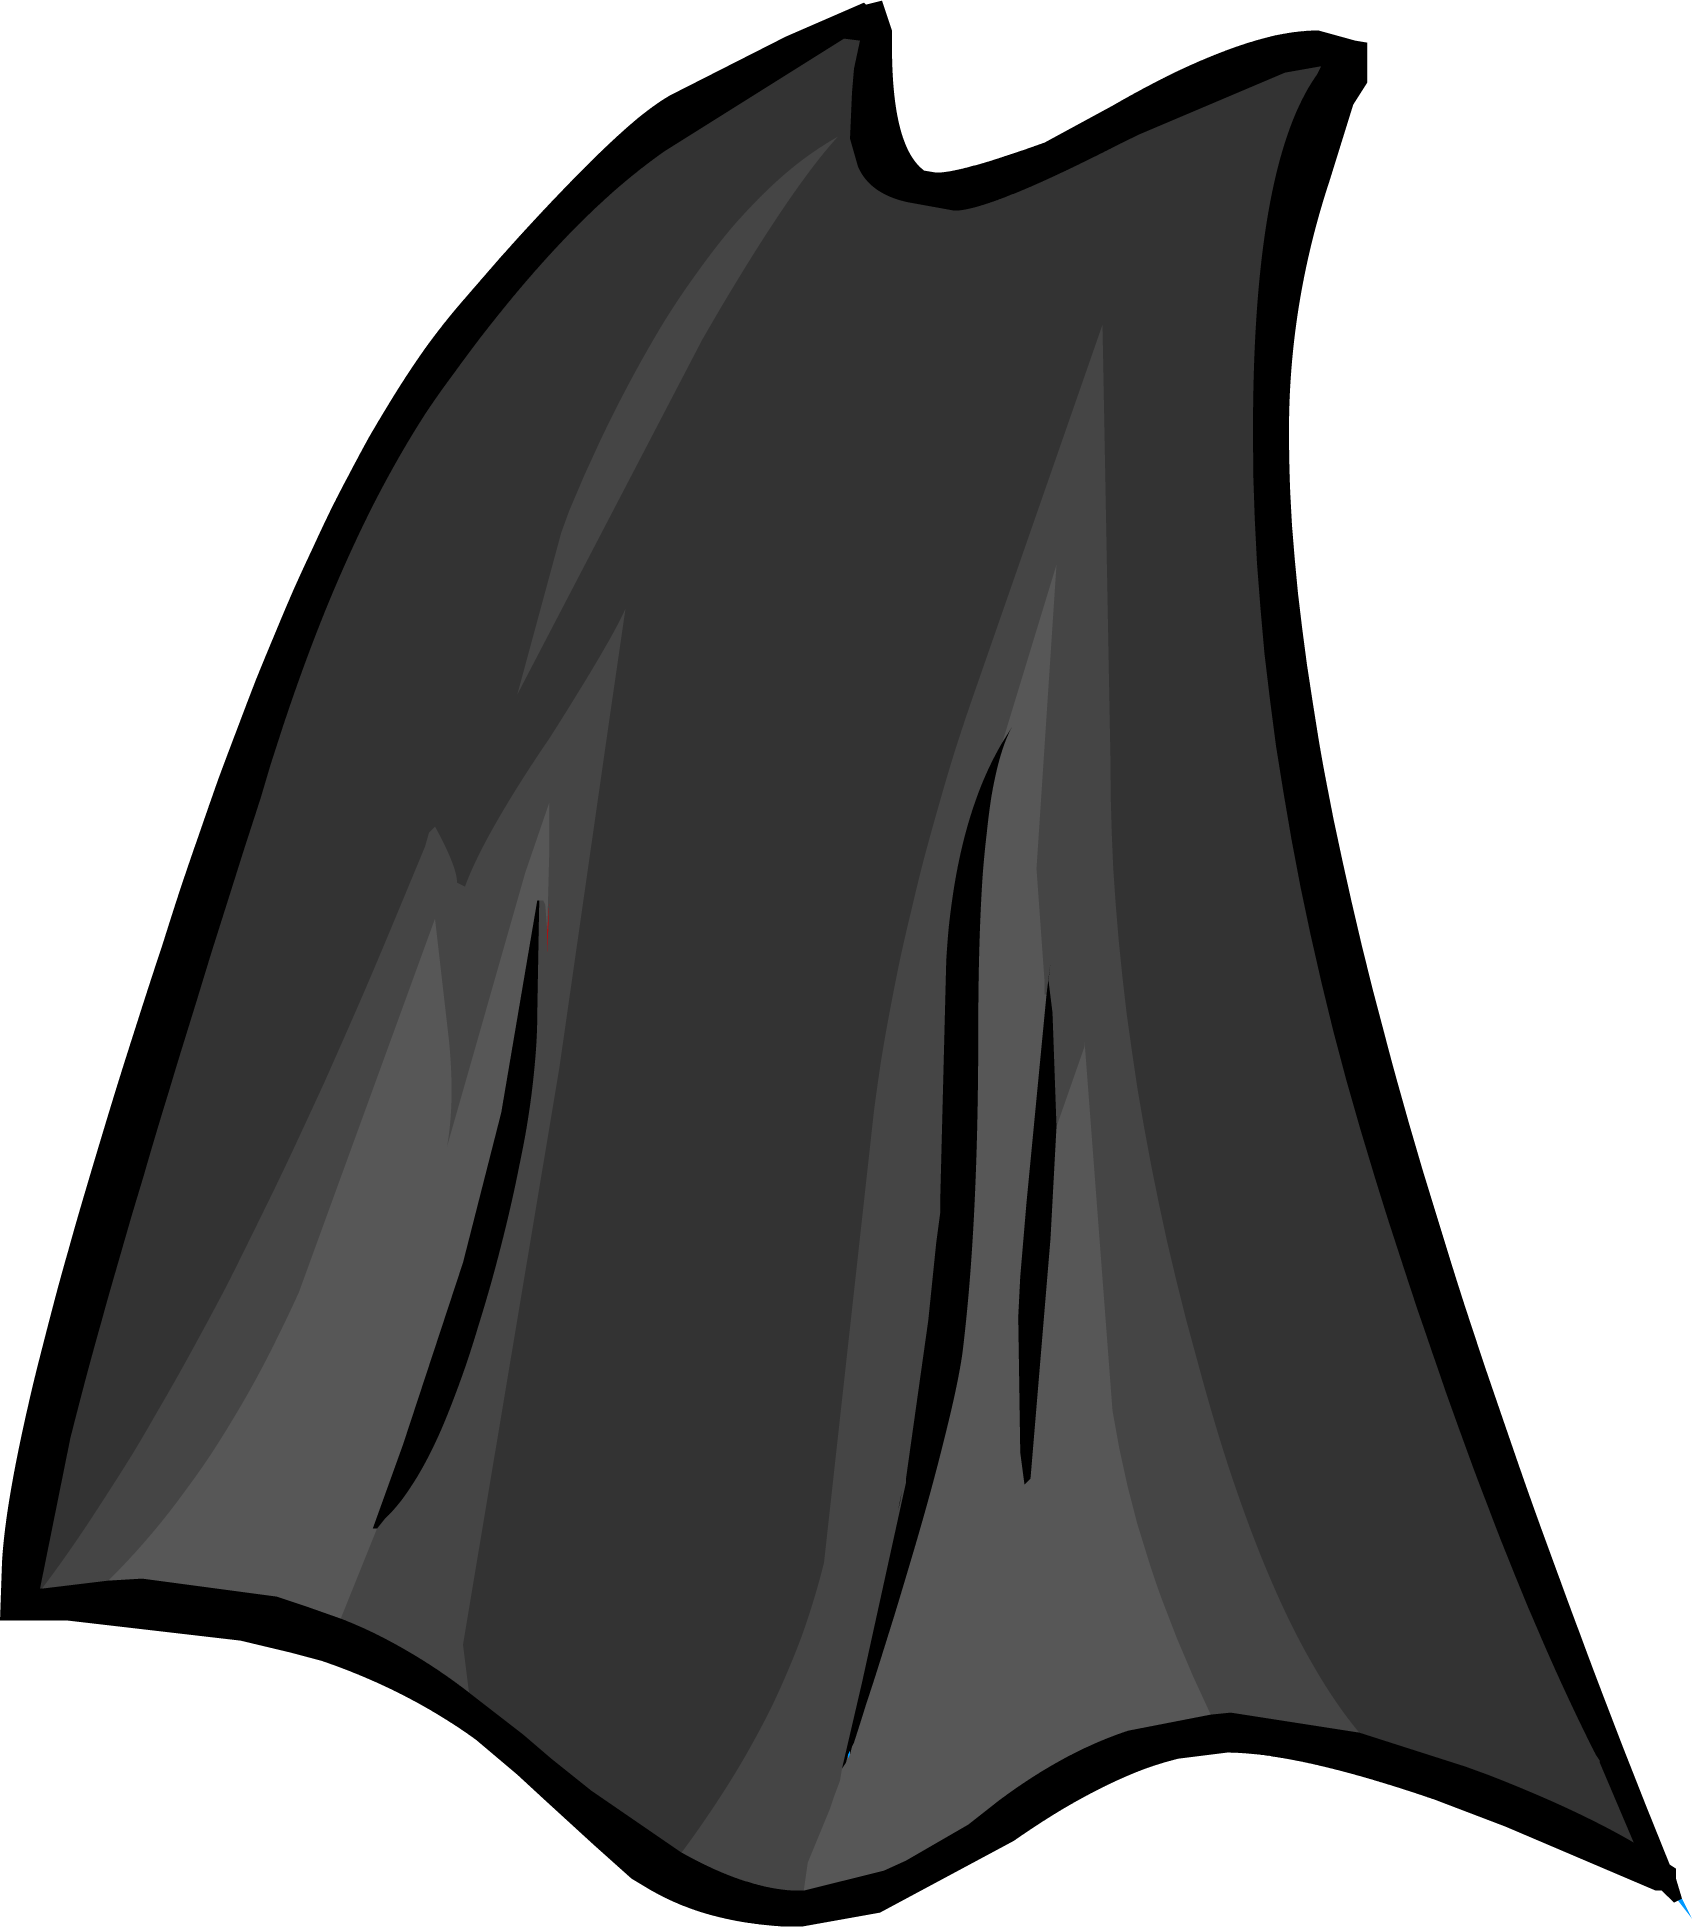 Category:Capes | Club Penguin Wiki | FANDOM powered by Wikia